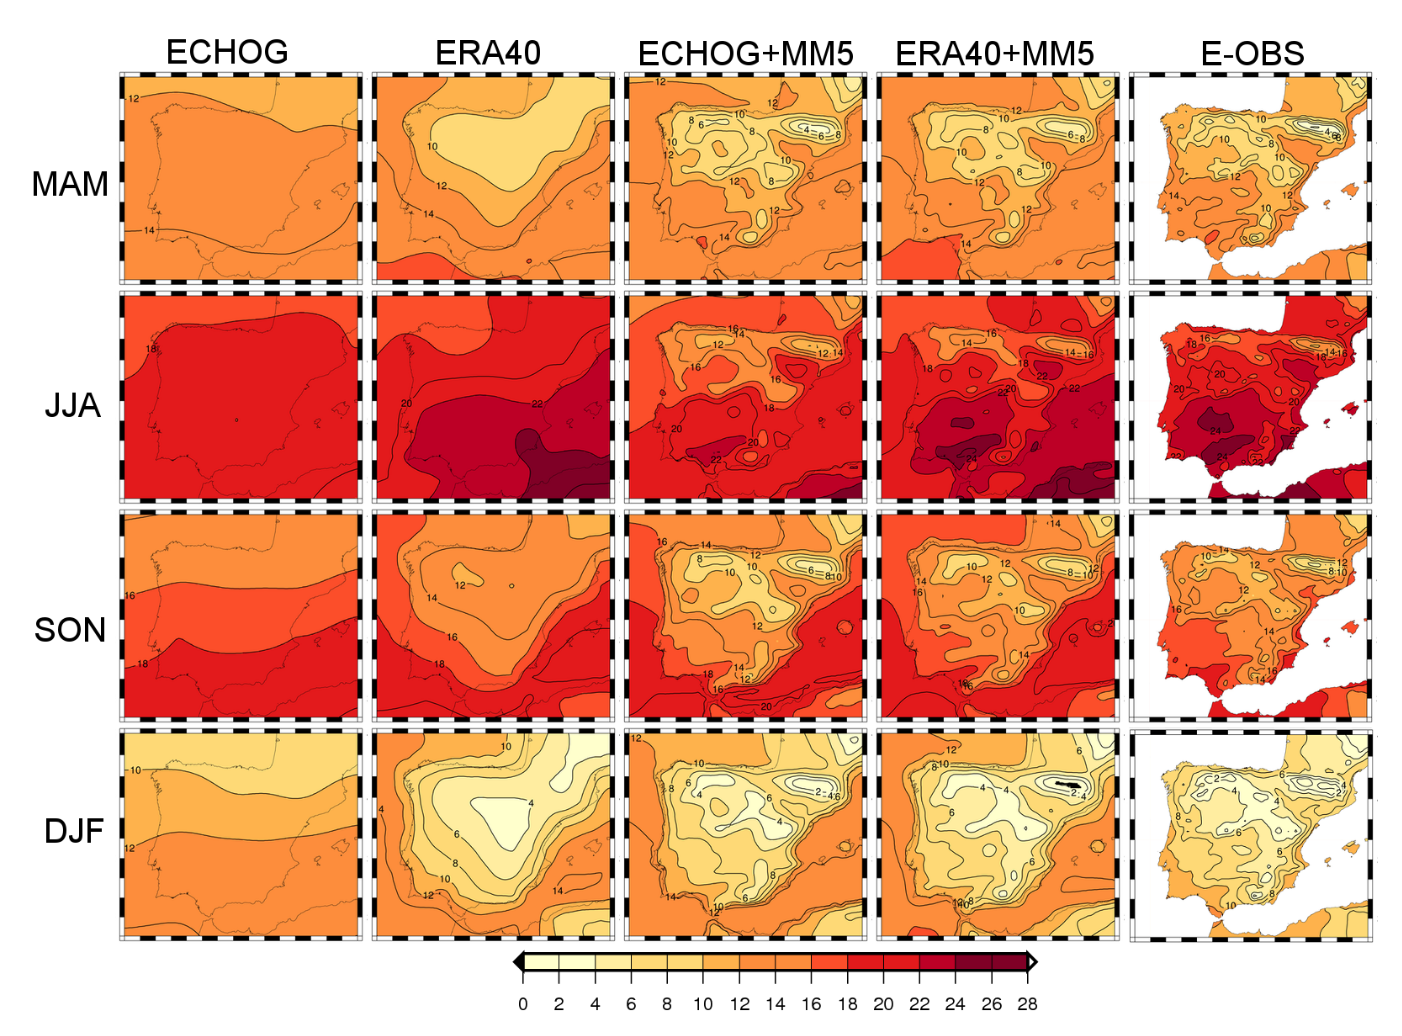 Fig. 3: Mean surface air temperature in a typical ESM (first column), Reanalysis (second column), output of both datasets once downscaled with a RCM (third and fourth columns) and observations (fifth column). (Taken from Gómez-Navarro JJ et al. 2011. "A regional climate simulation over the Iberian Peninsula for the last millennium", Clim. Past 7, 451-472, https://doi.org/10.5194/cp-7-451-2011)